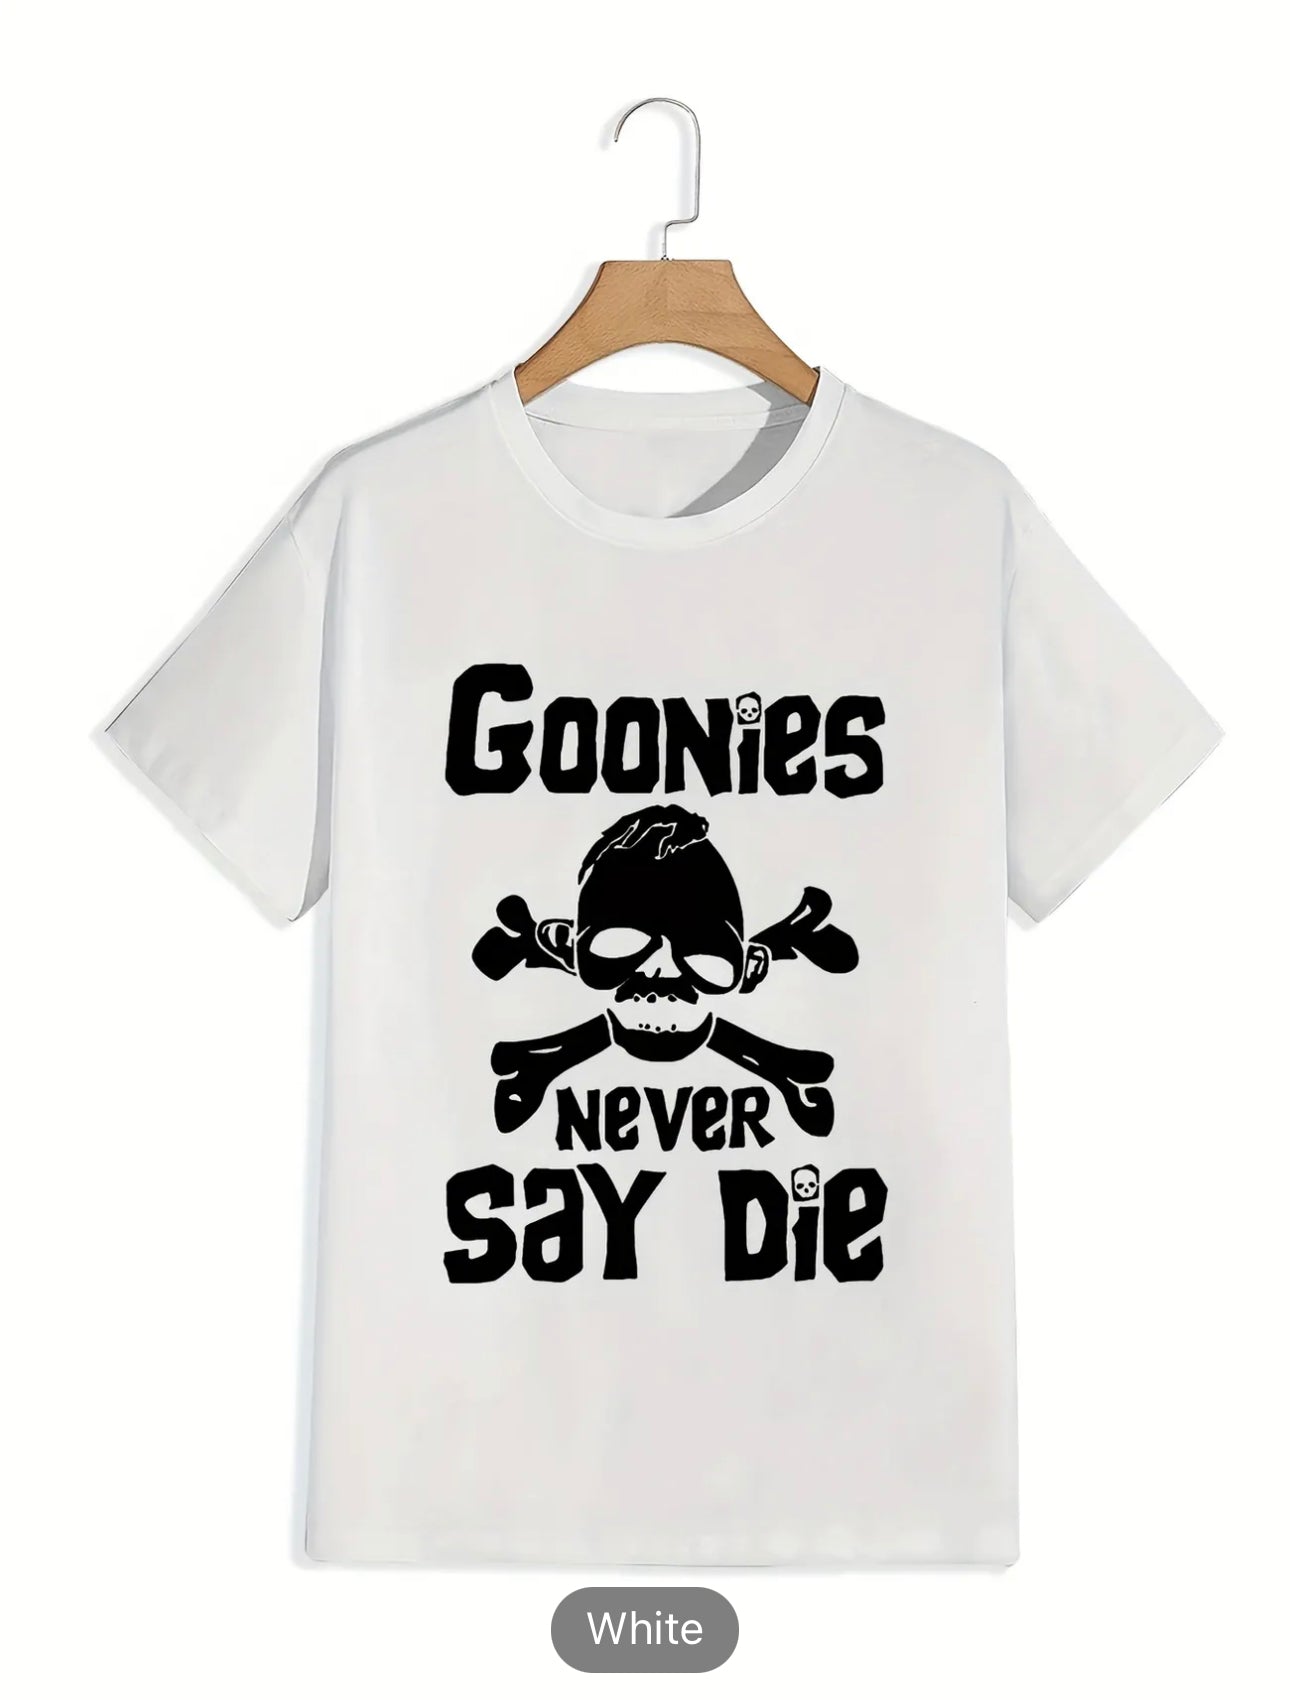 Big & Tall Guys: Look Cool This Summer with the 'GOONIES NEVER SAY DIE' Graphic Print T-Shirt!